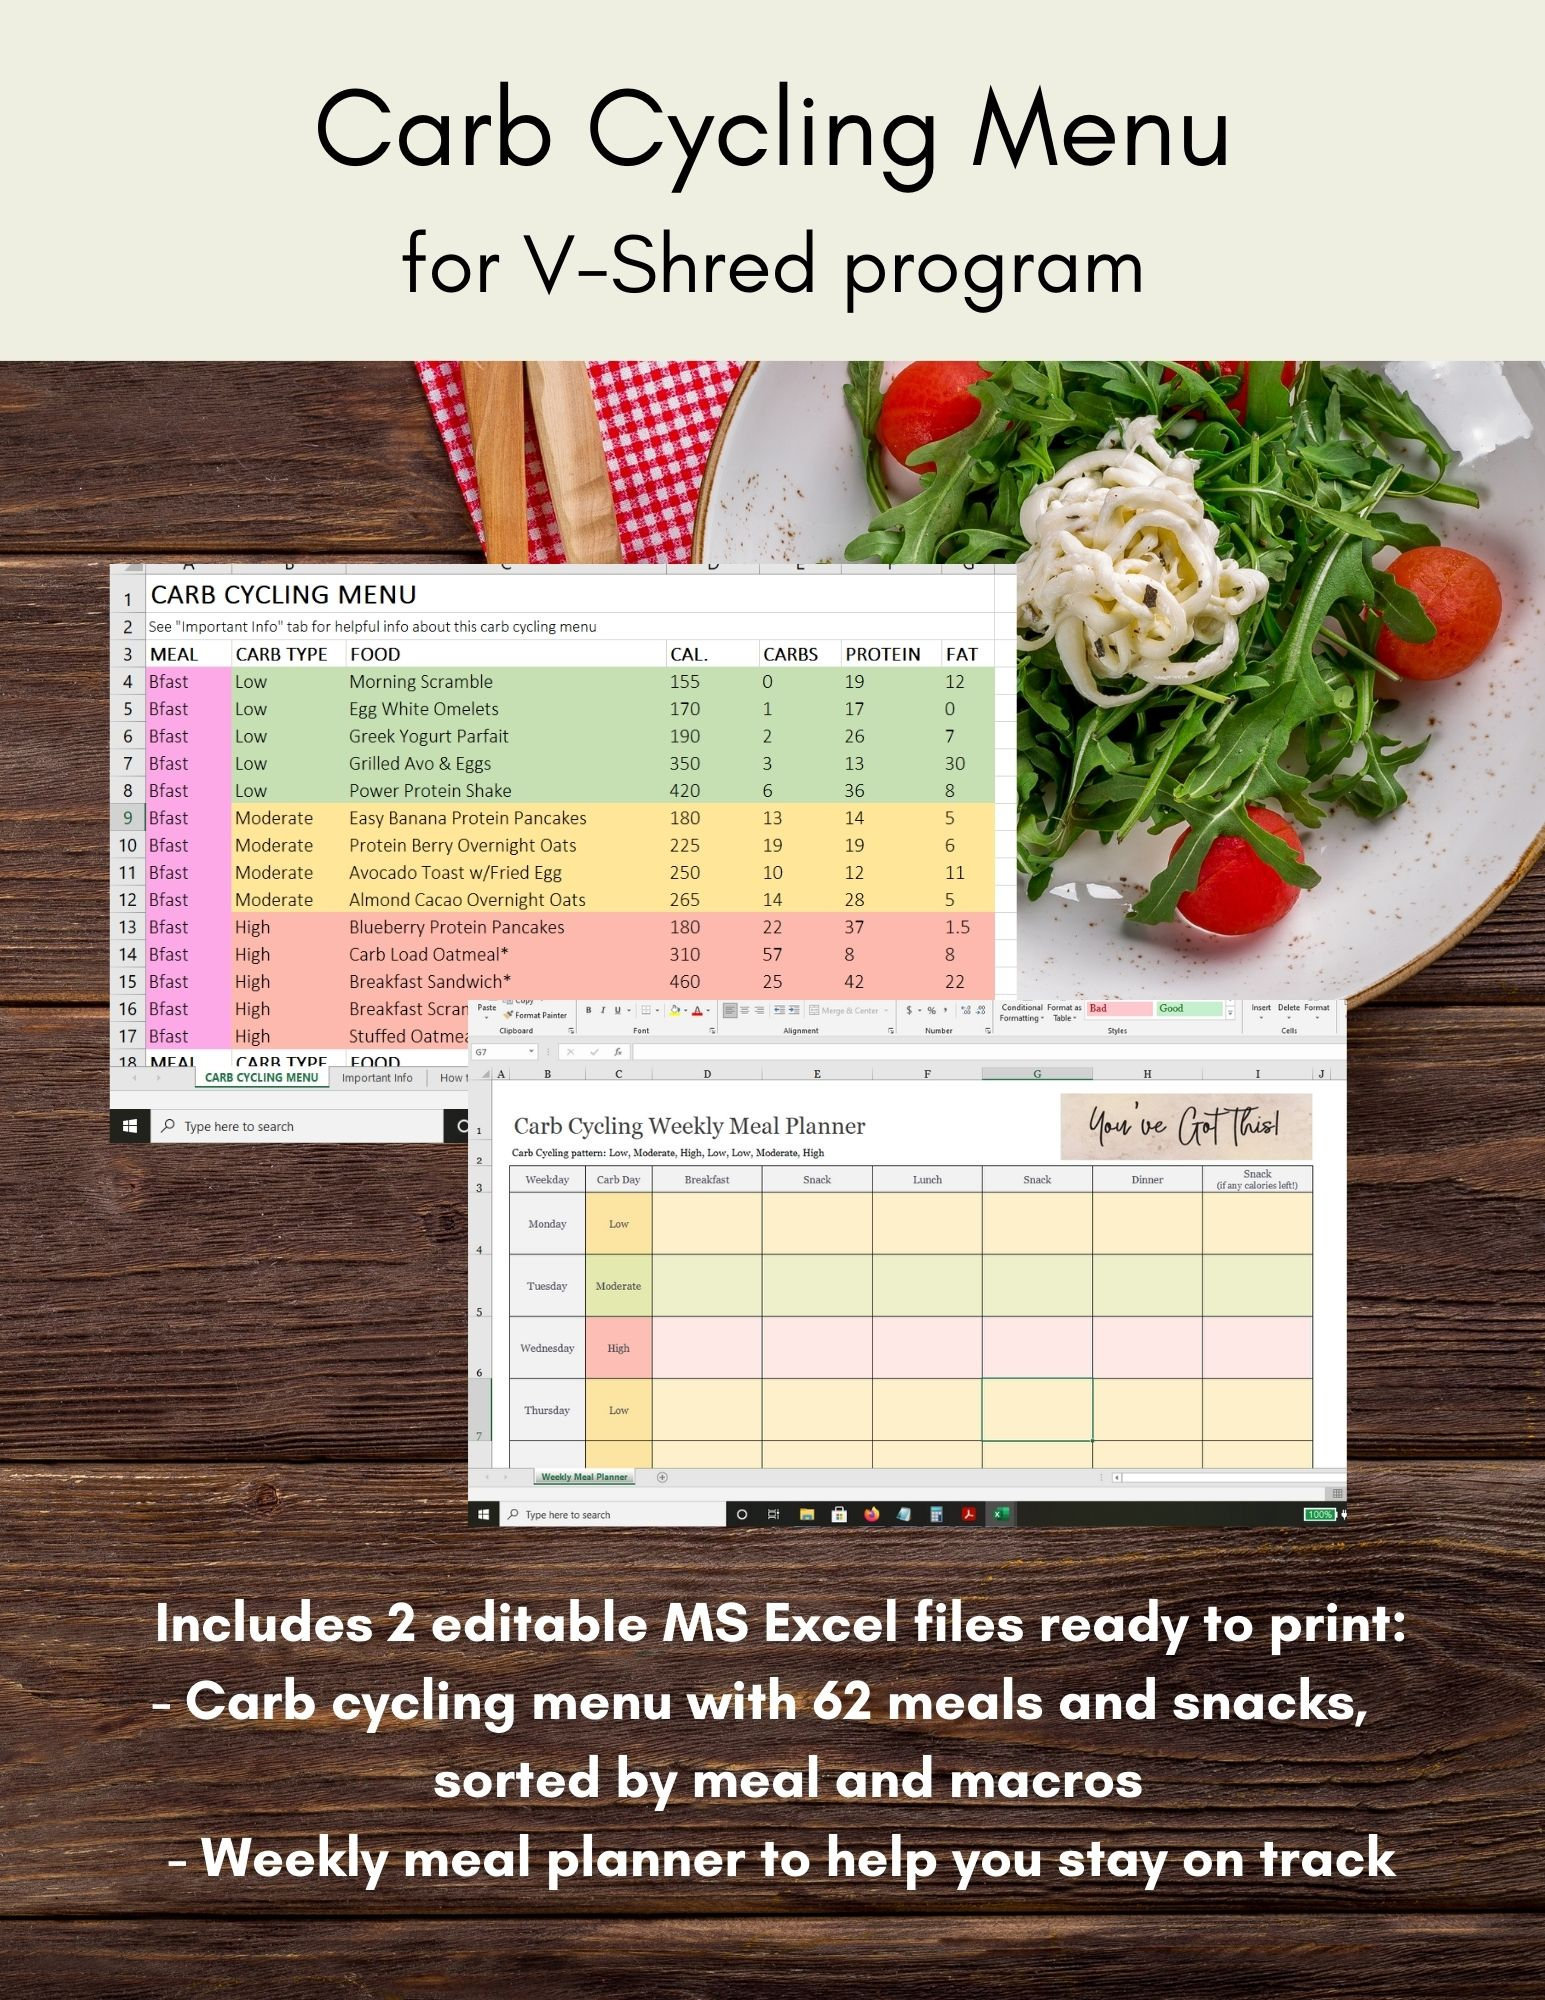 Carb Cycling Menu And Meal Planner For V-Shred - Etsy